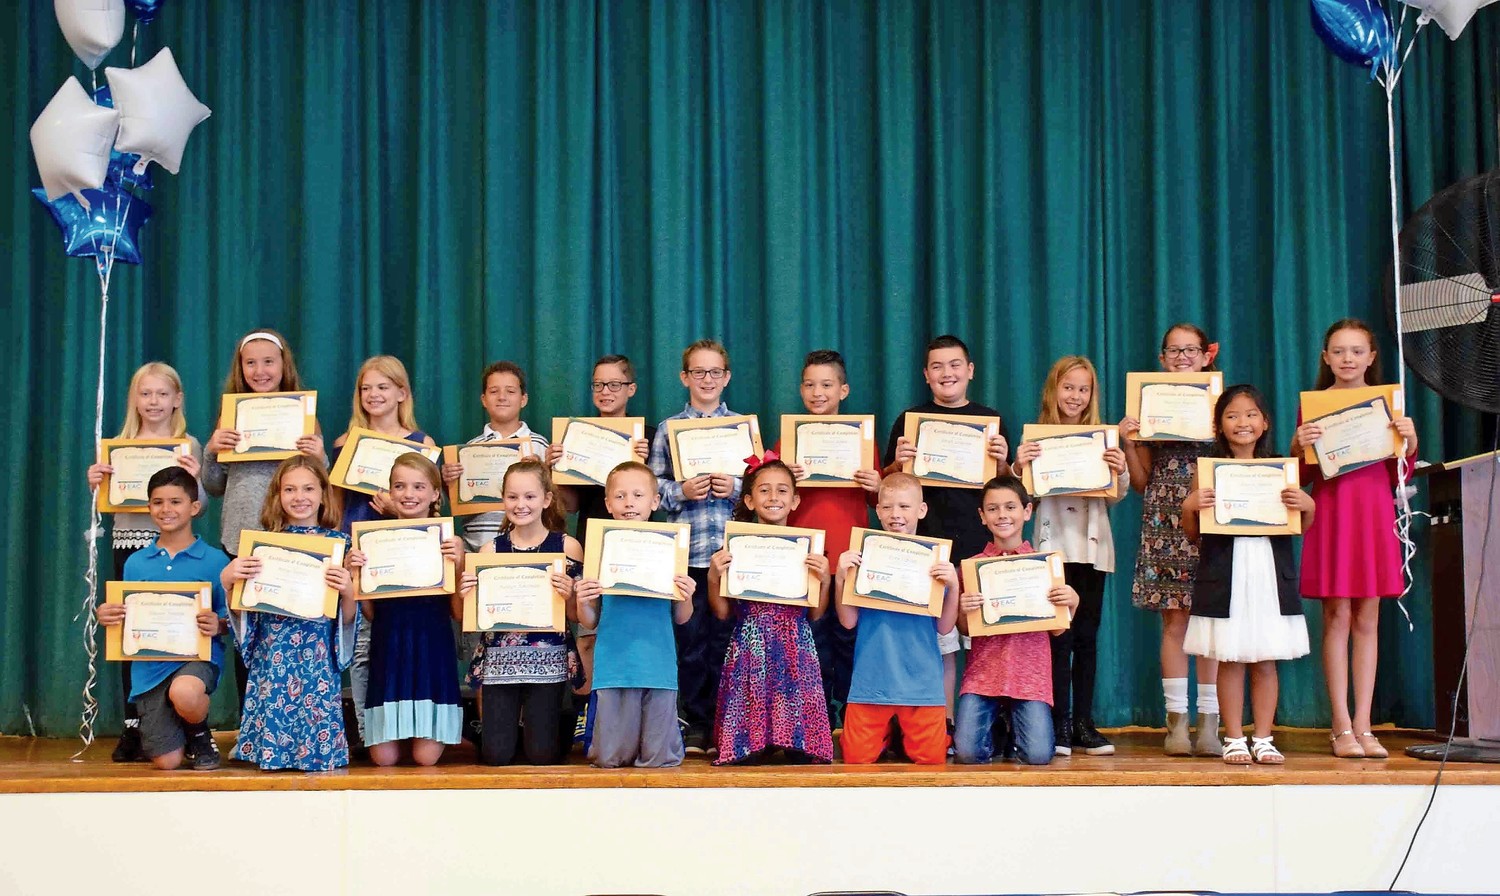 20 students from East Broadway Elementary School were named peer mediators during a ceremony on Oct. 13.